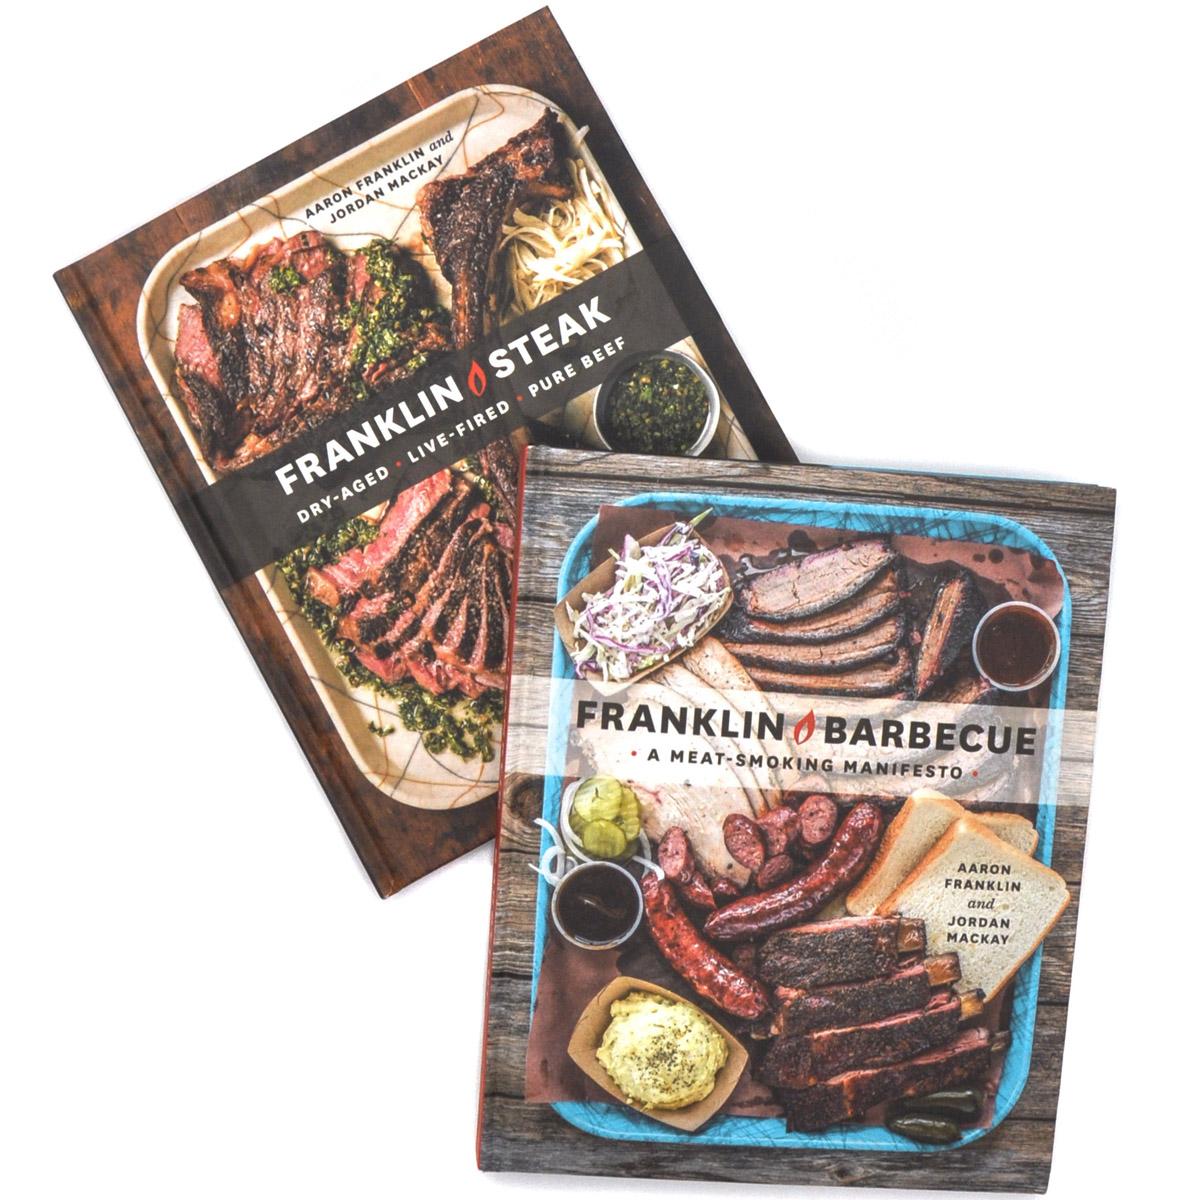 Franklin Barbecue: A Meat-Smoking Manifesto eBook for $2.99